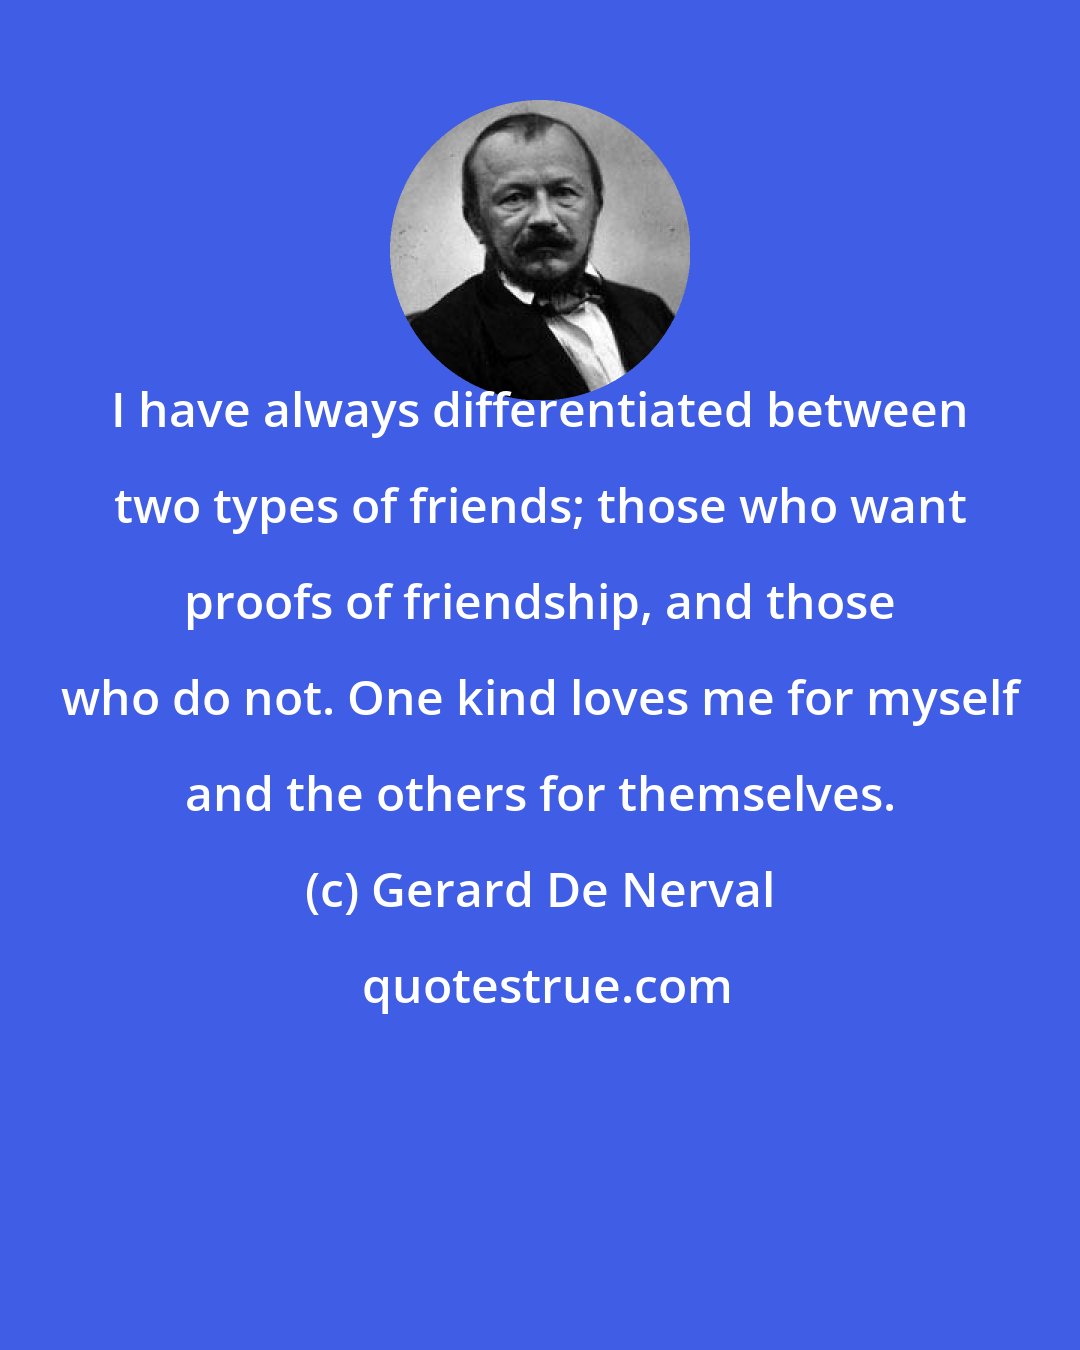 Gerard De Nerval: I have always differentiated between two types of friends; those who want proofs of friendship, and those who do not. One kind loves me for myself and the others for themselves.